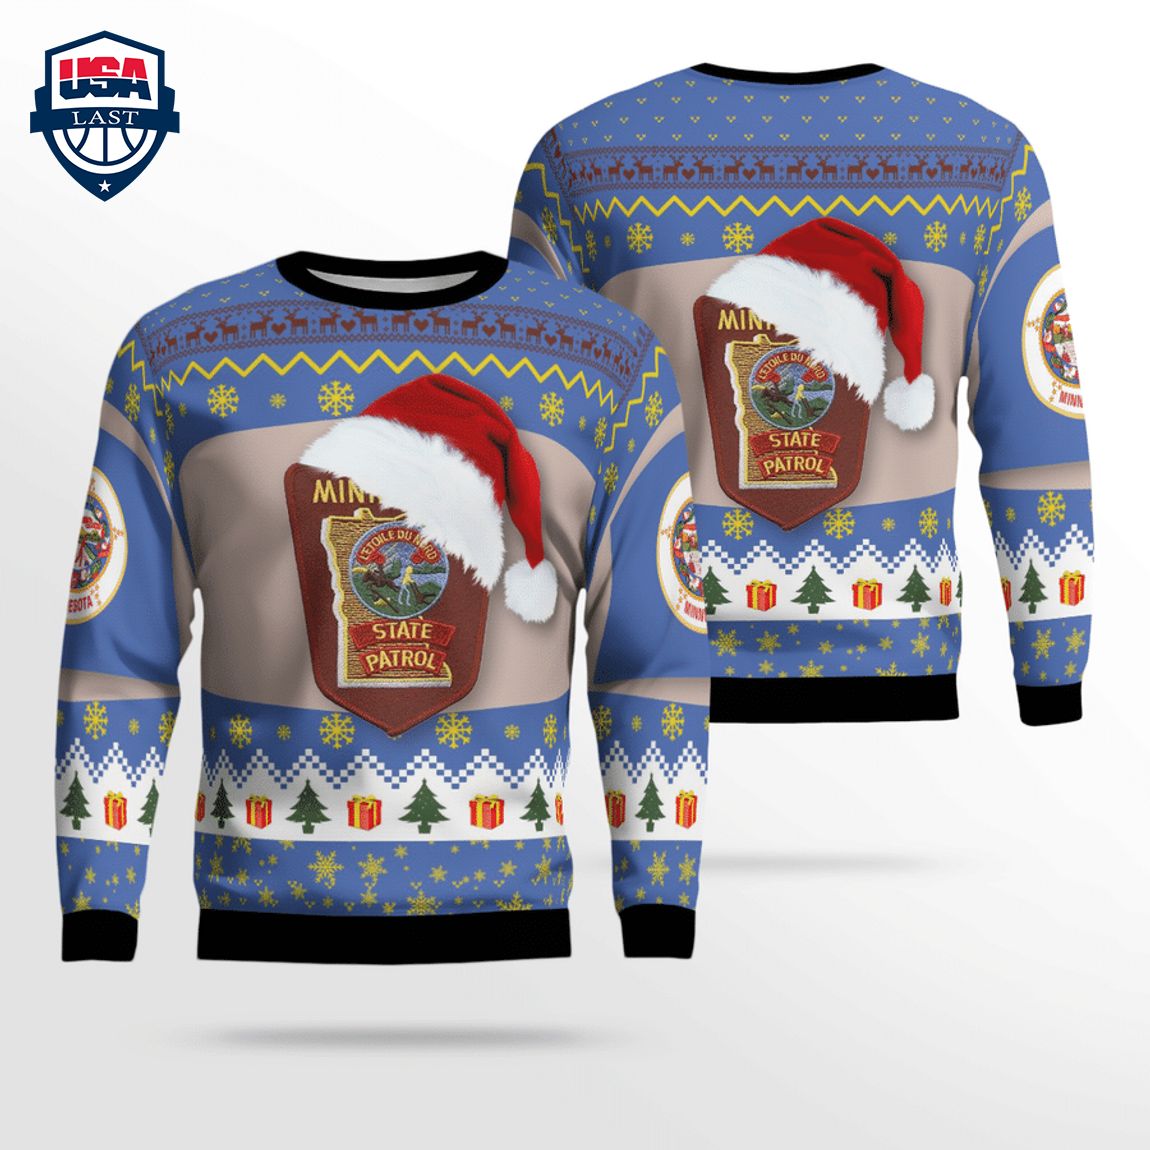 Minnesota State Patrol 3D Christmas Sweater - Radiant and glowing Pic dear